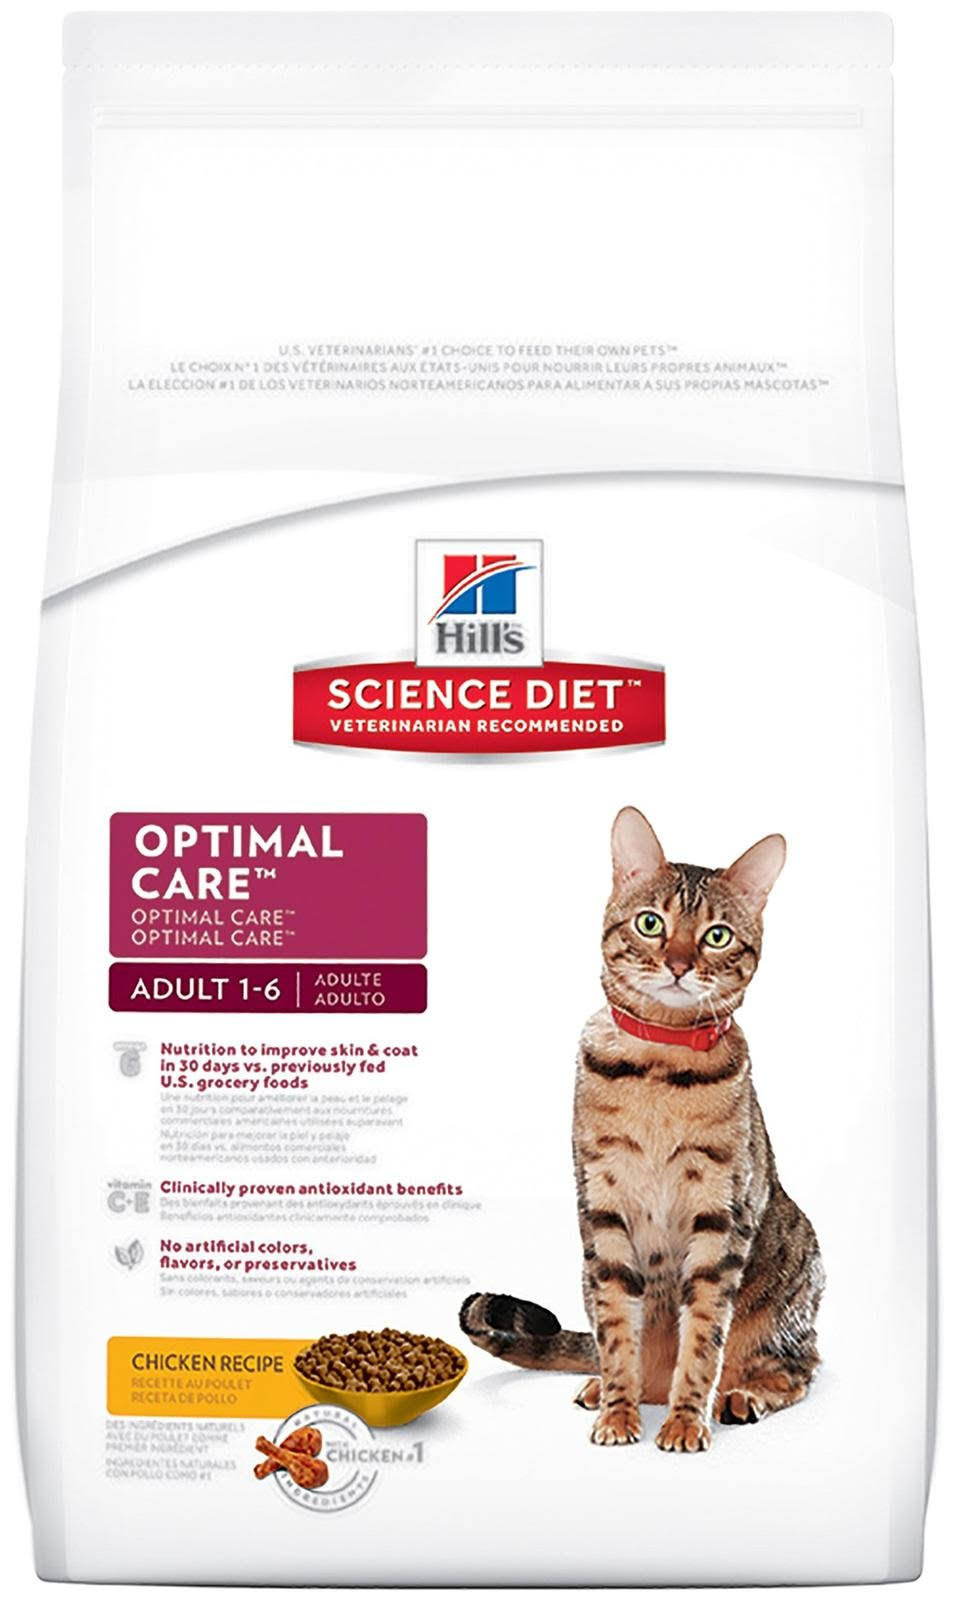 Hill's Science Diet Optimal Care Premium Natural Cat Food - Chicken Recipe, Adult 1-6, 16lbs